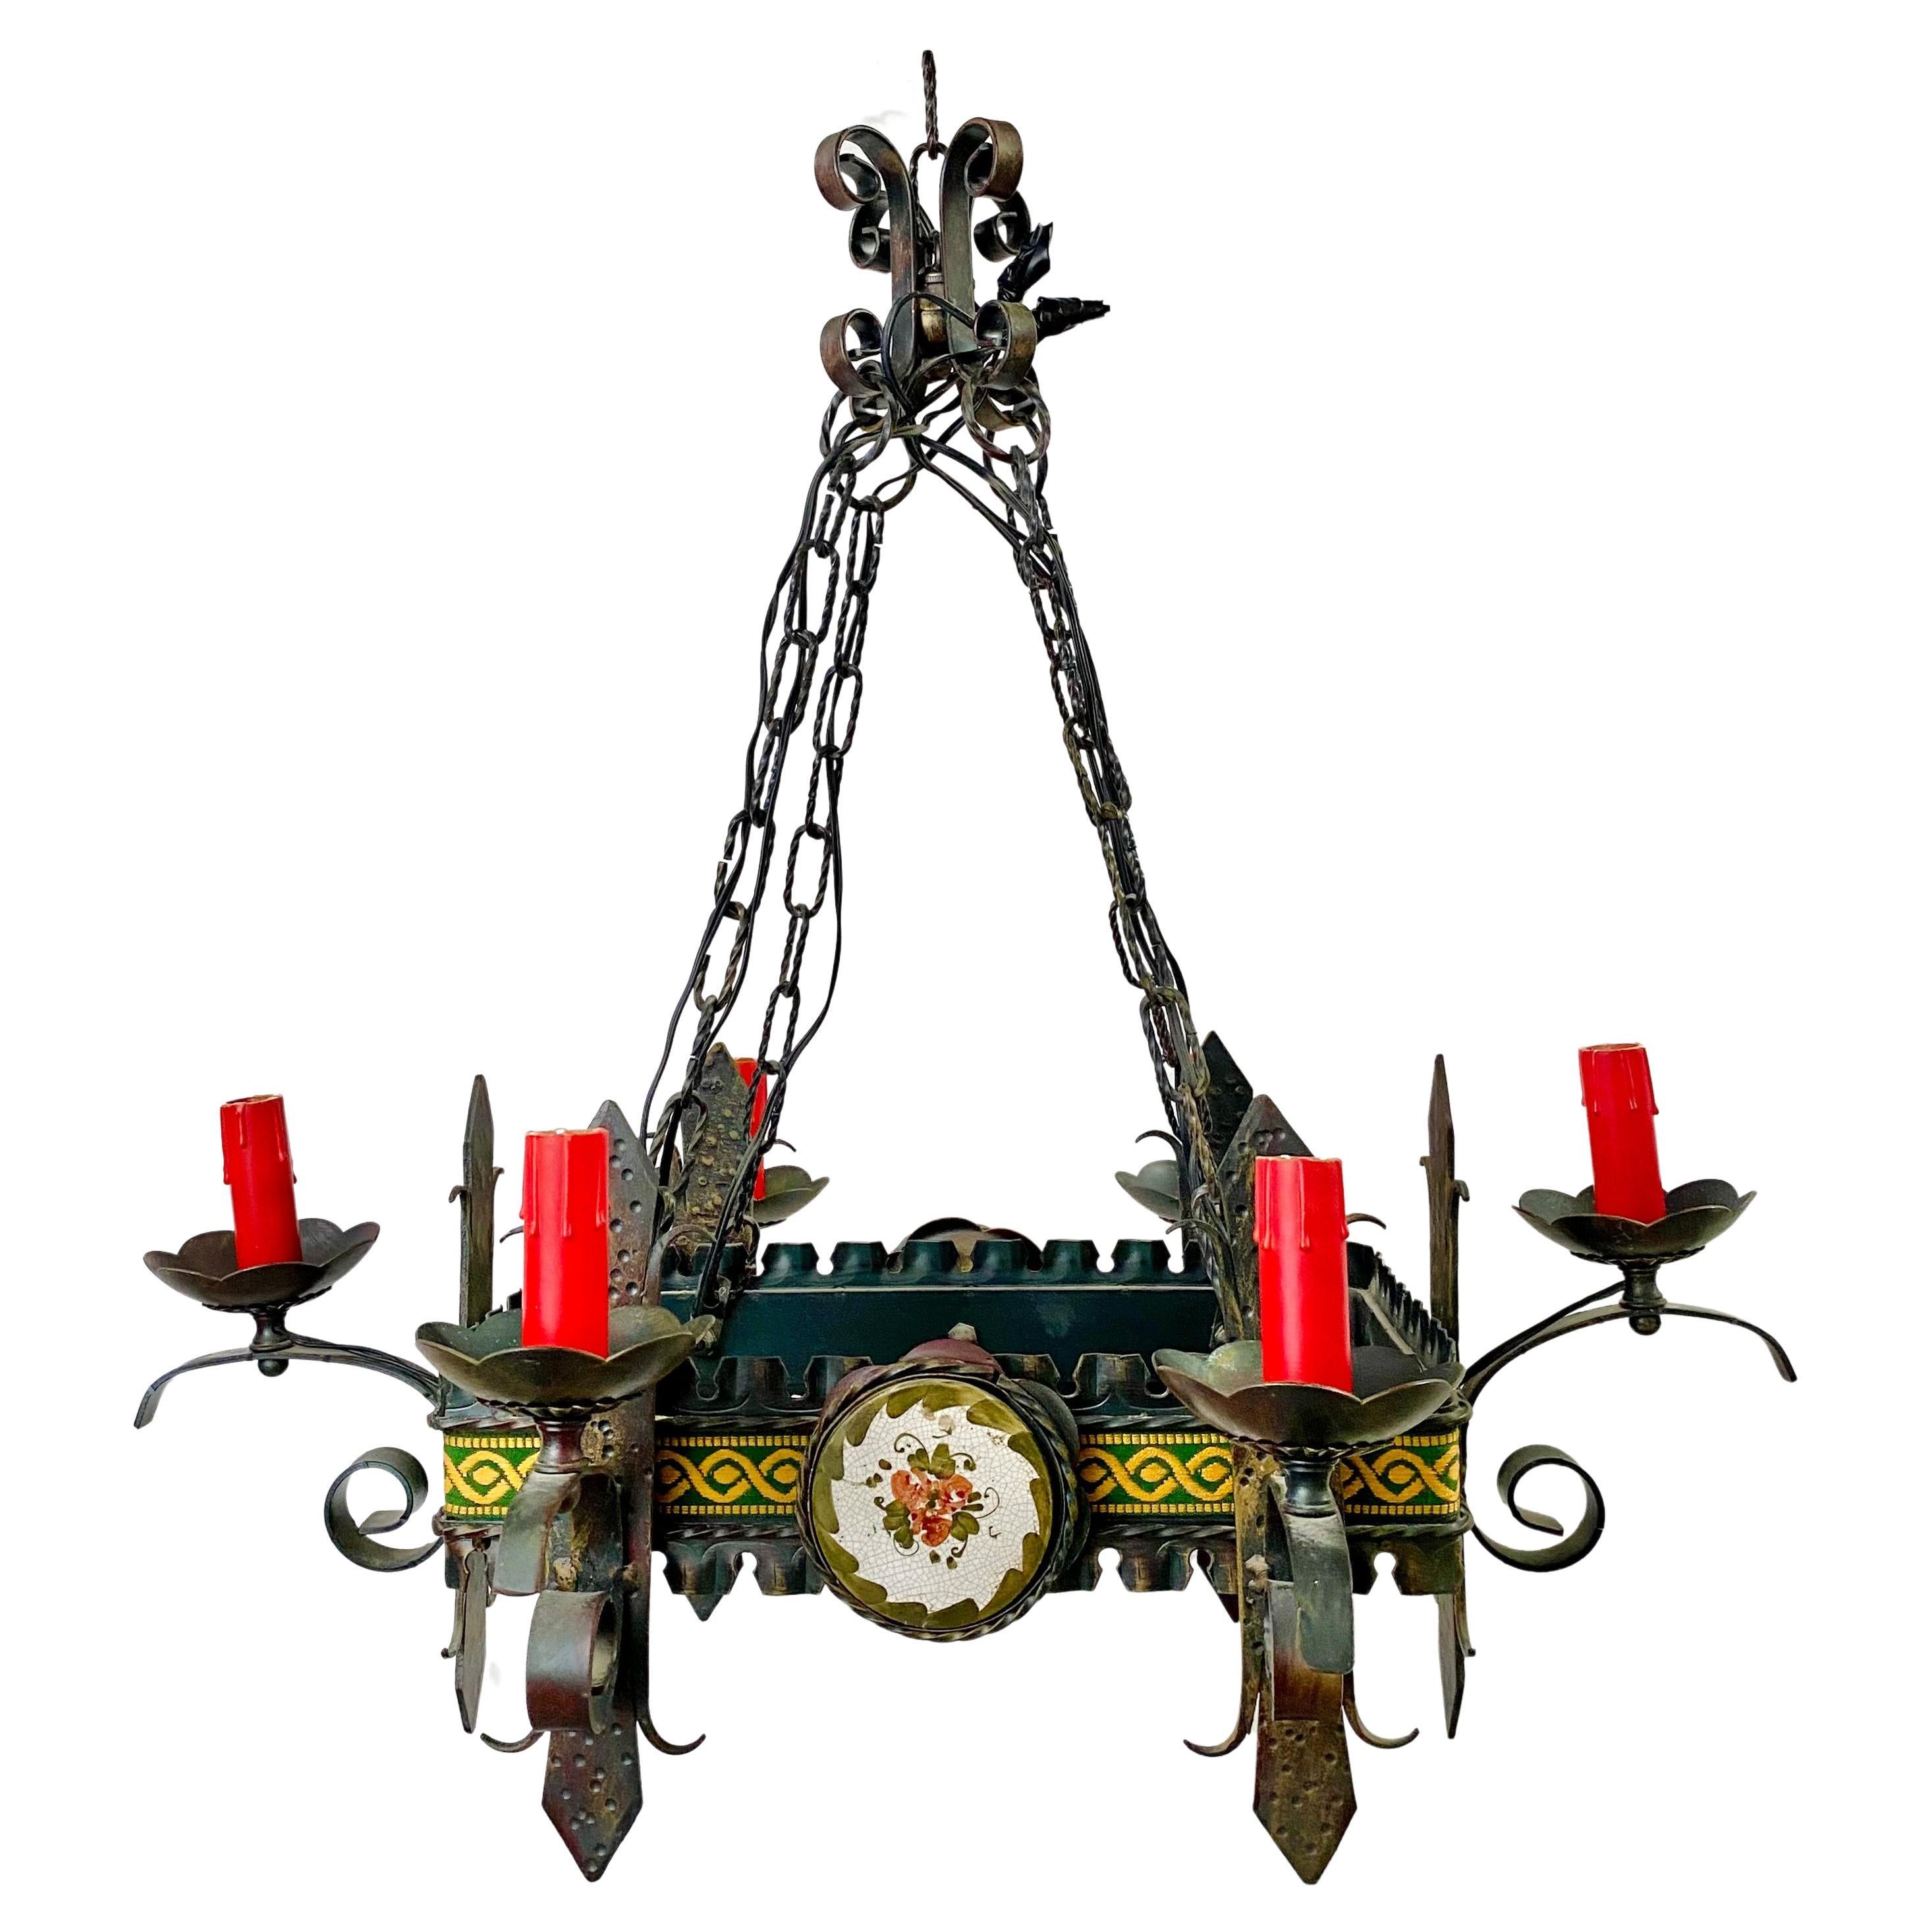 French Gothic Style Wrought Iron 6 Arms Rectangular Chandelier or Pendant